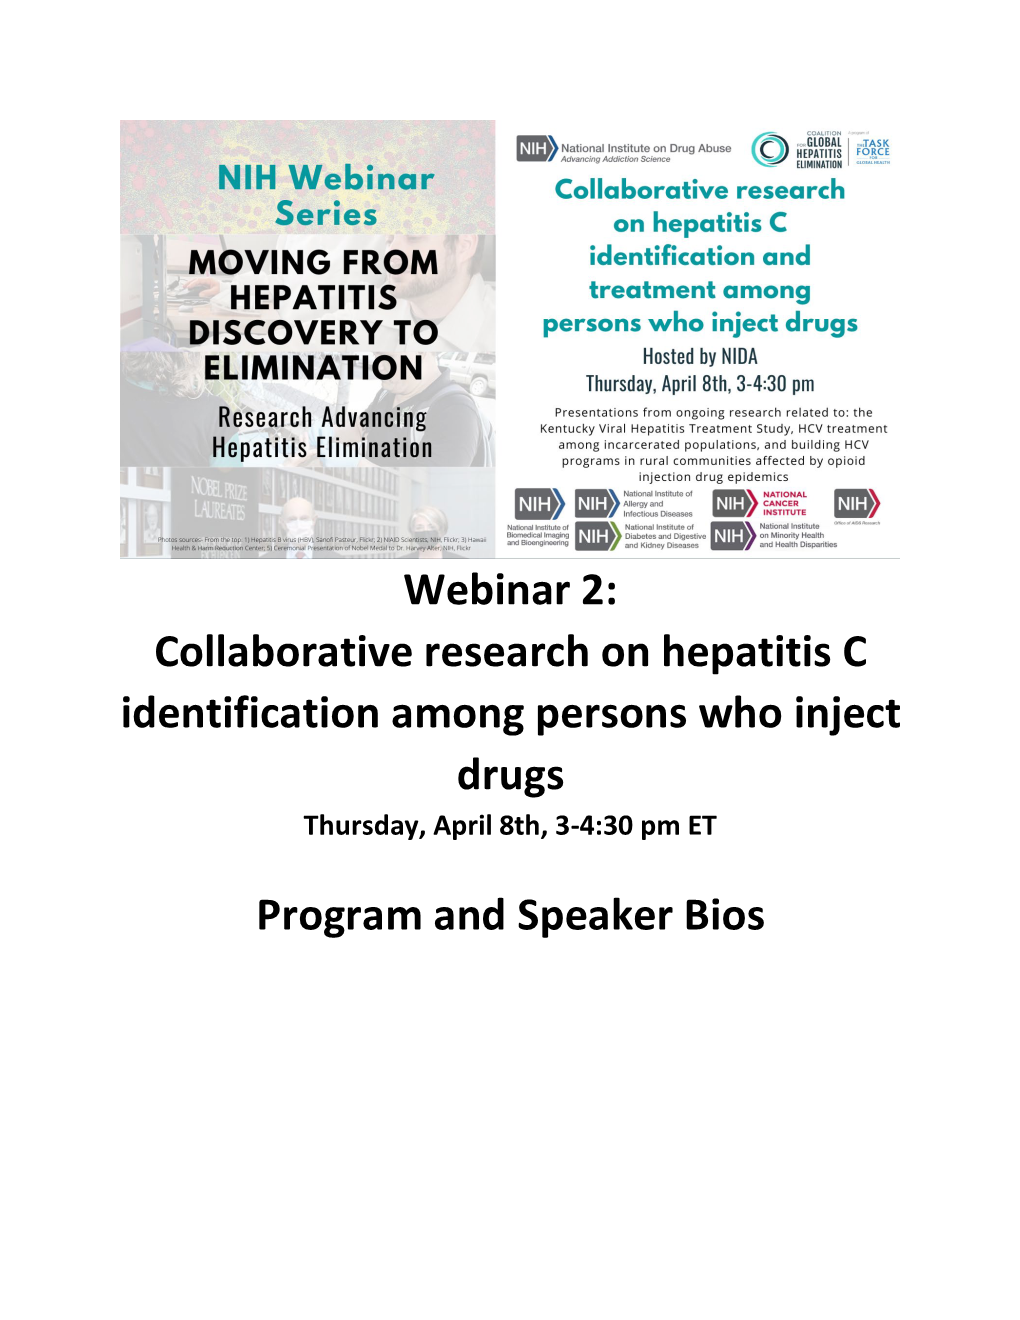 Collaborative Research on Hepatitis C Identification Among Persons Who Inject Drugs Thursday, April 8Th, 3-4:30 Pm ET